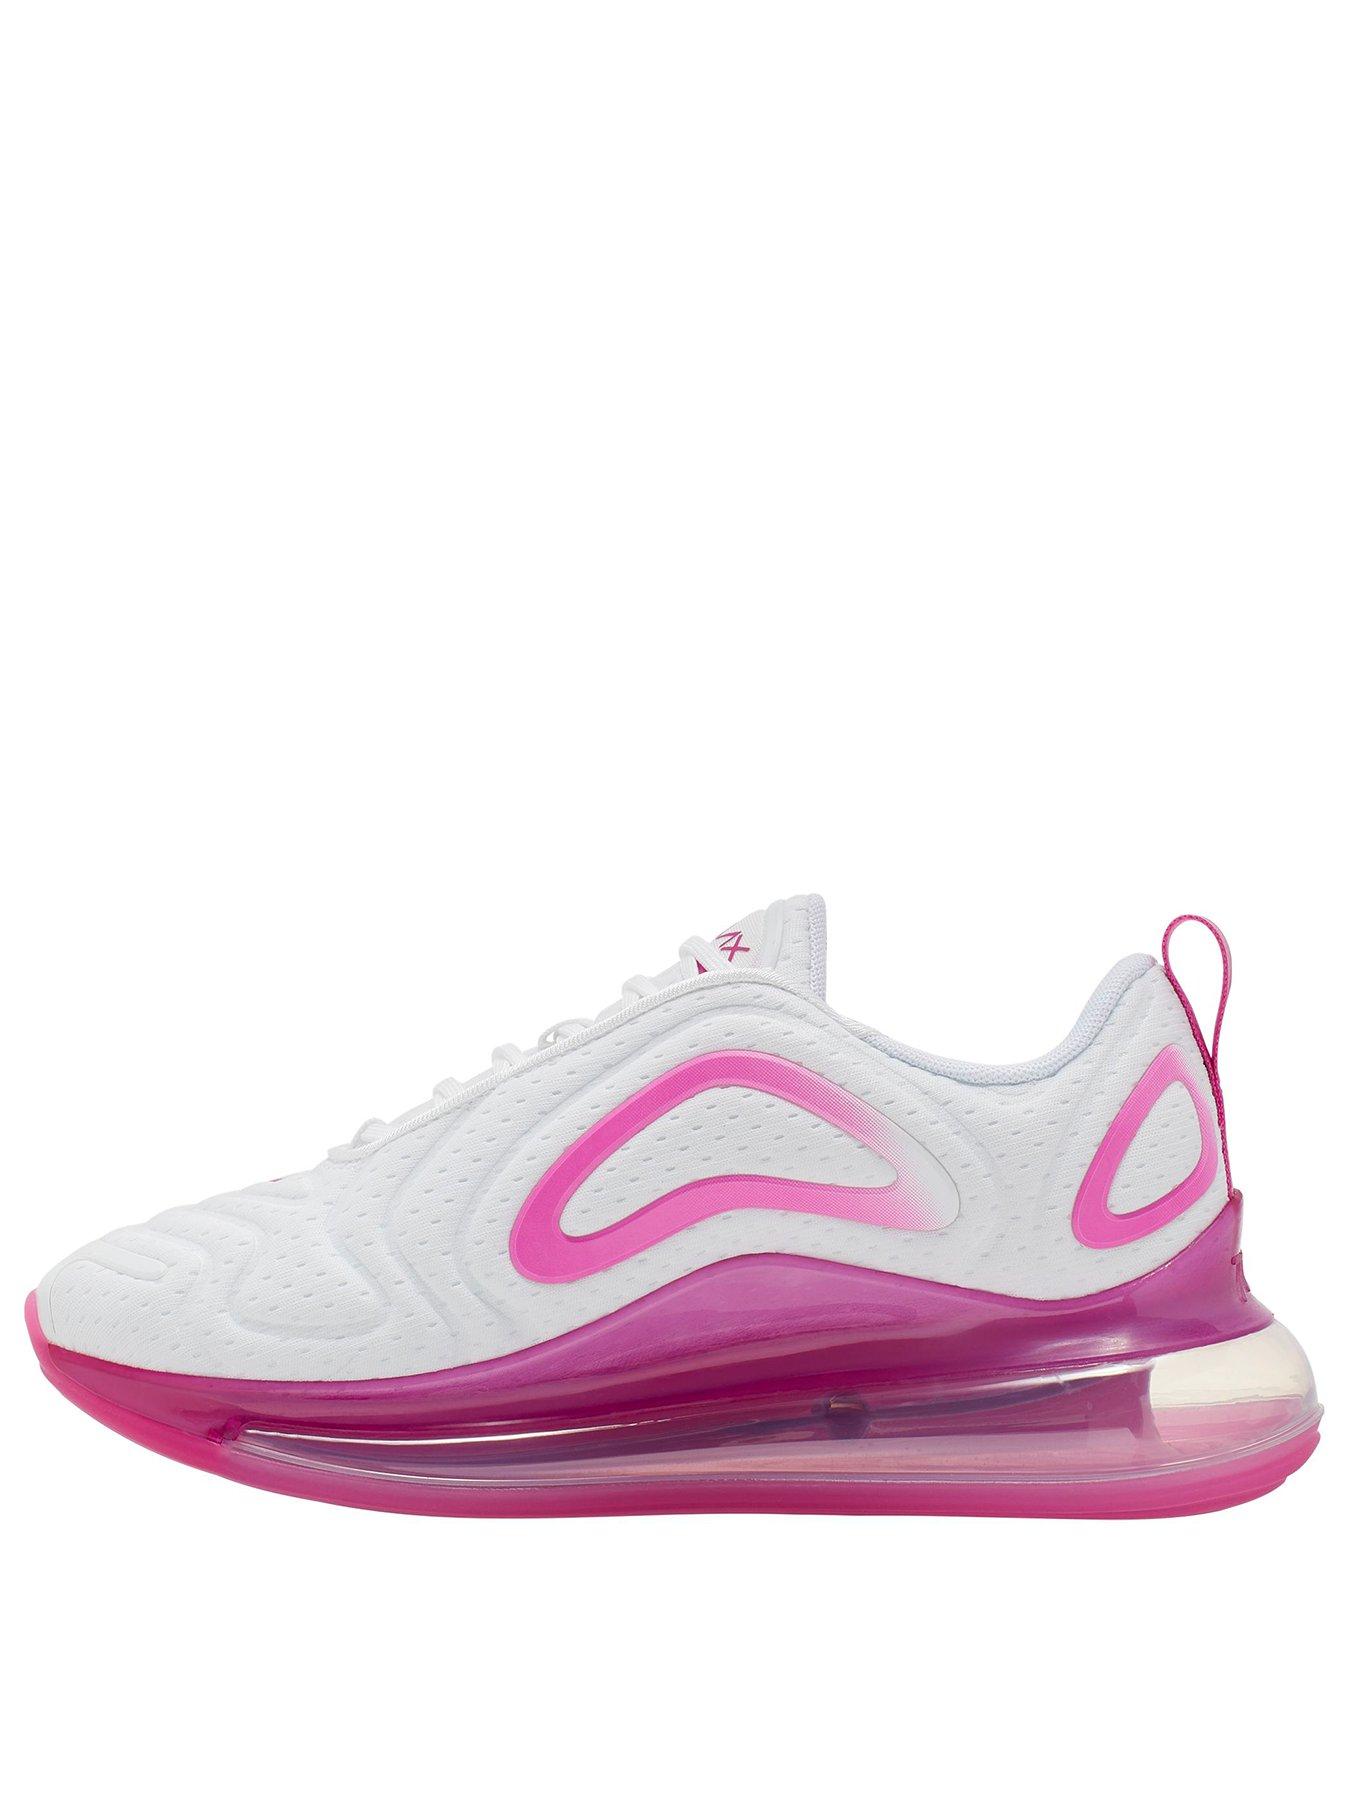 pink nike bubble trainers